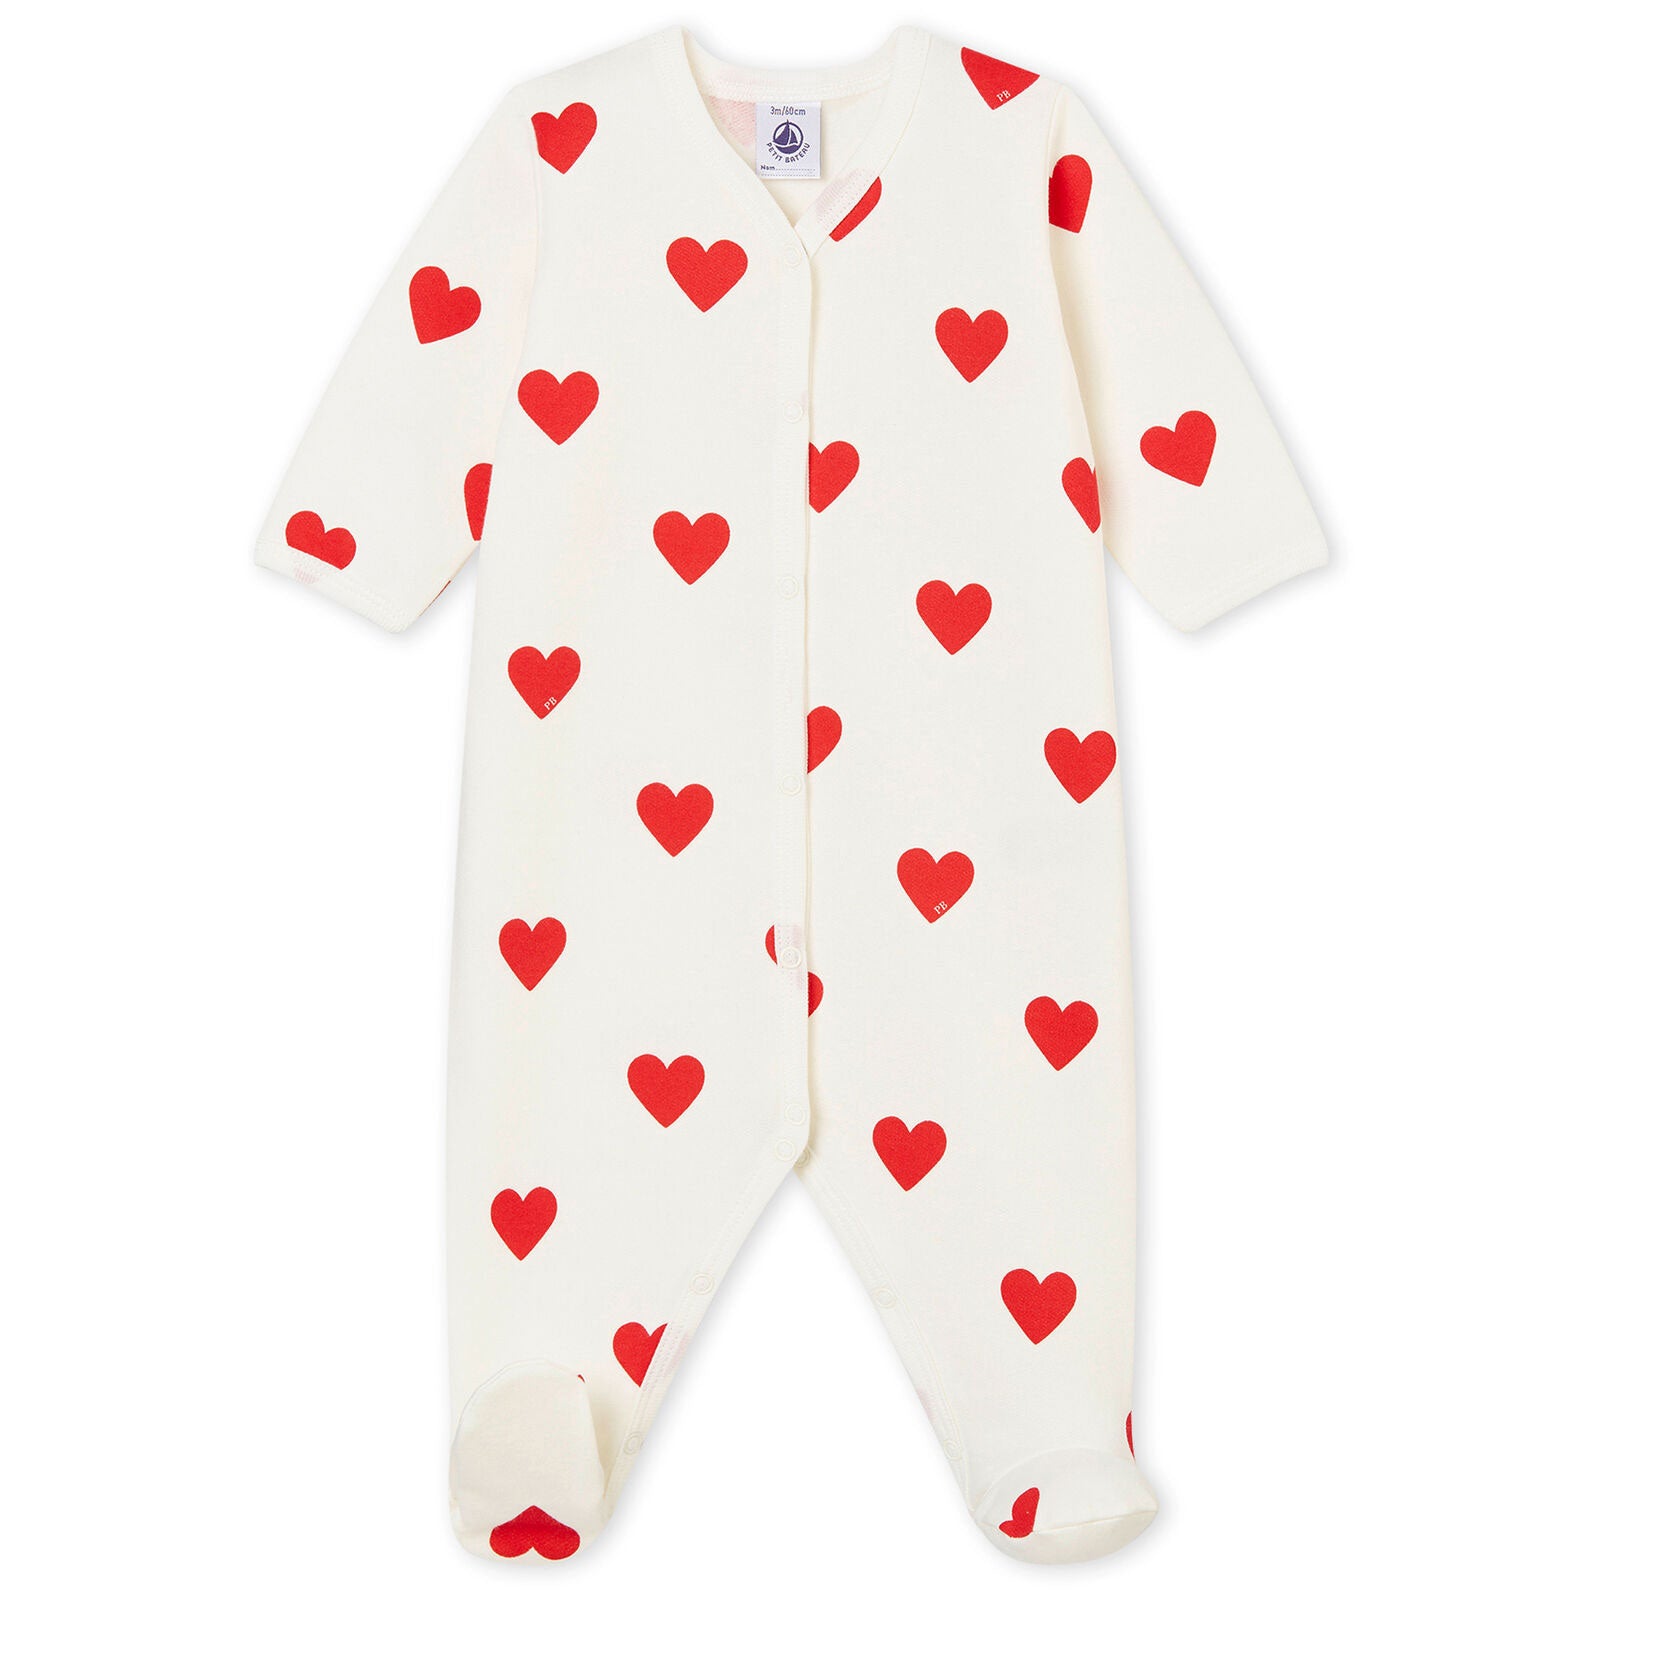 Heart Baby Romper by Petit Bateau at Bonjour Baby Baskets 